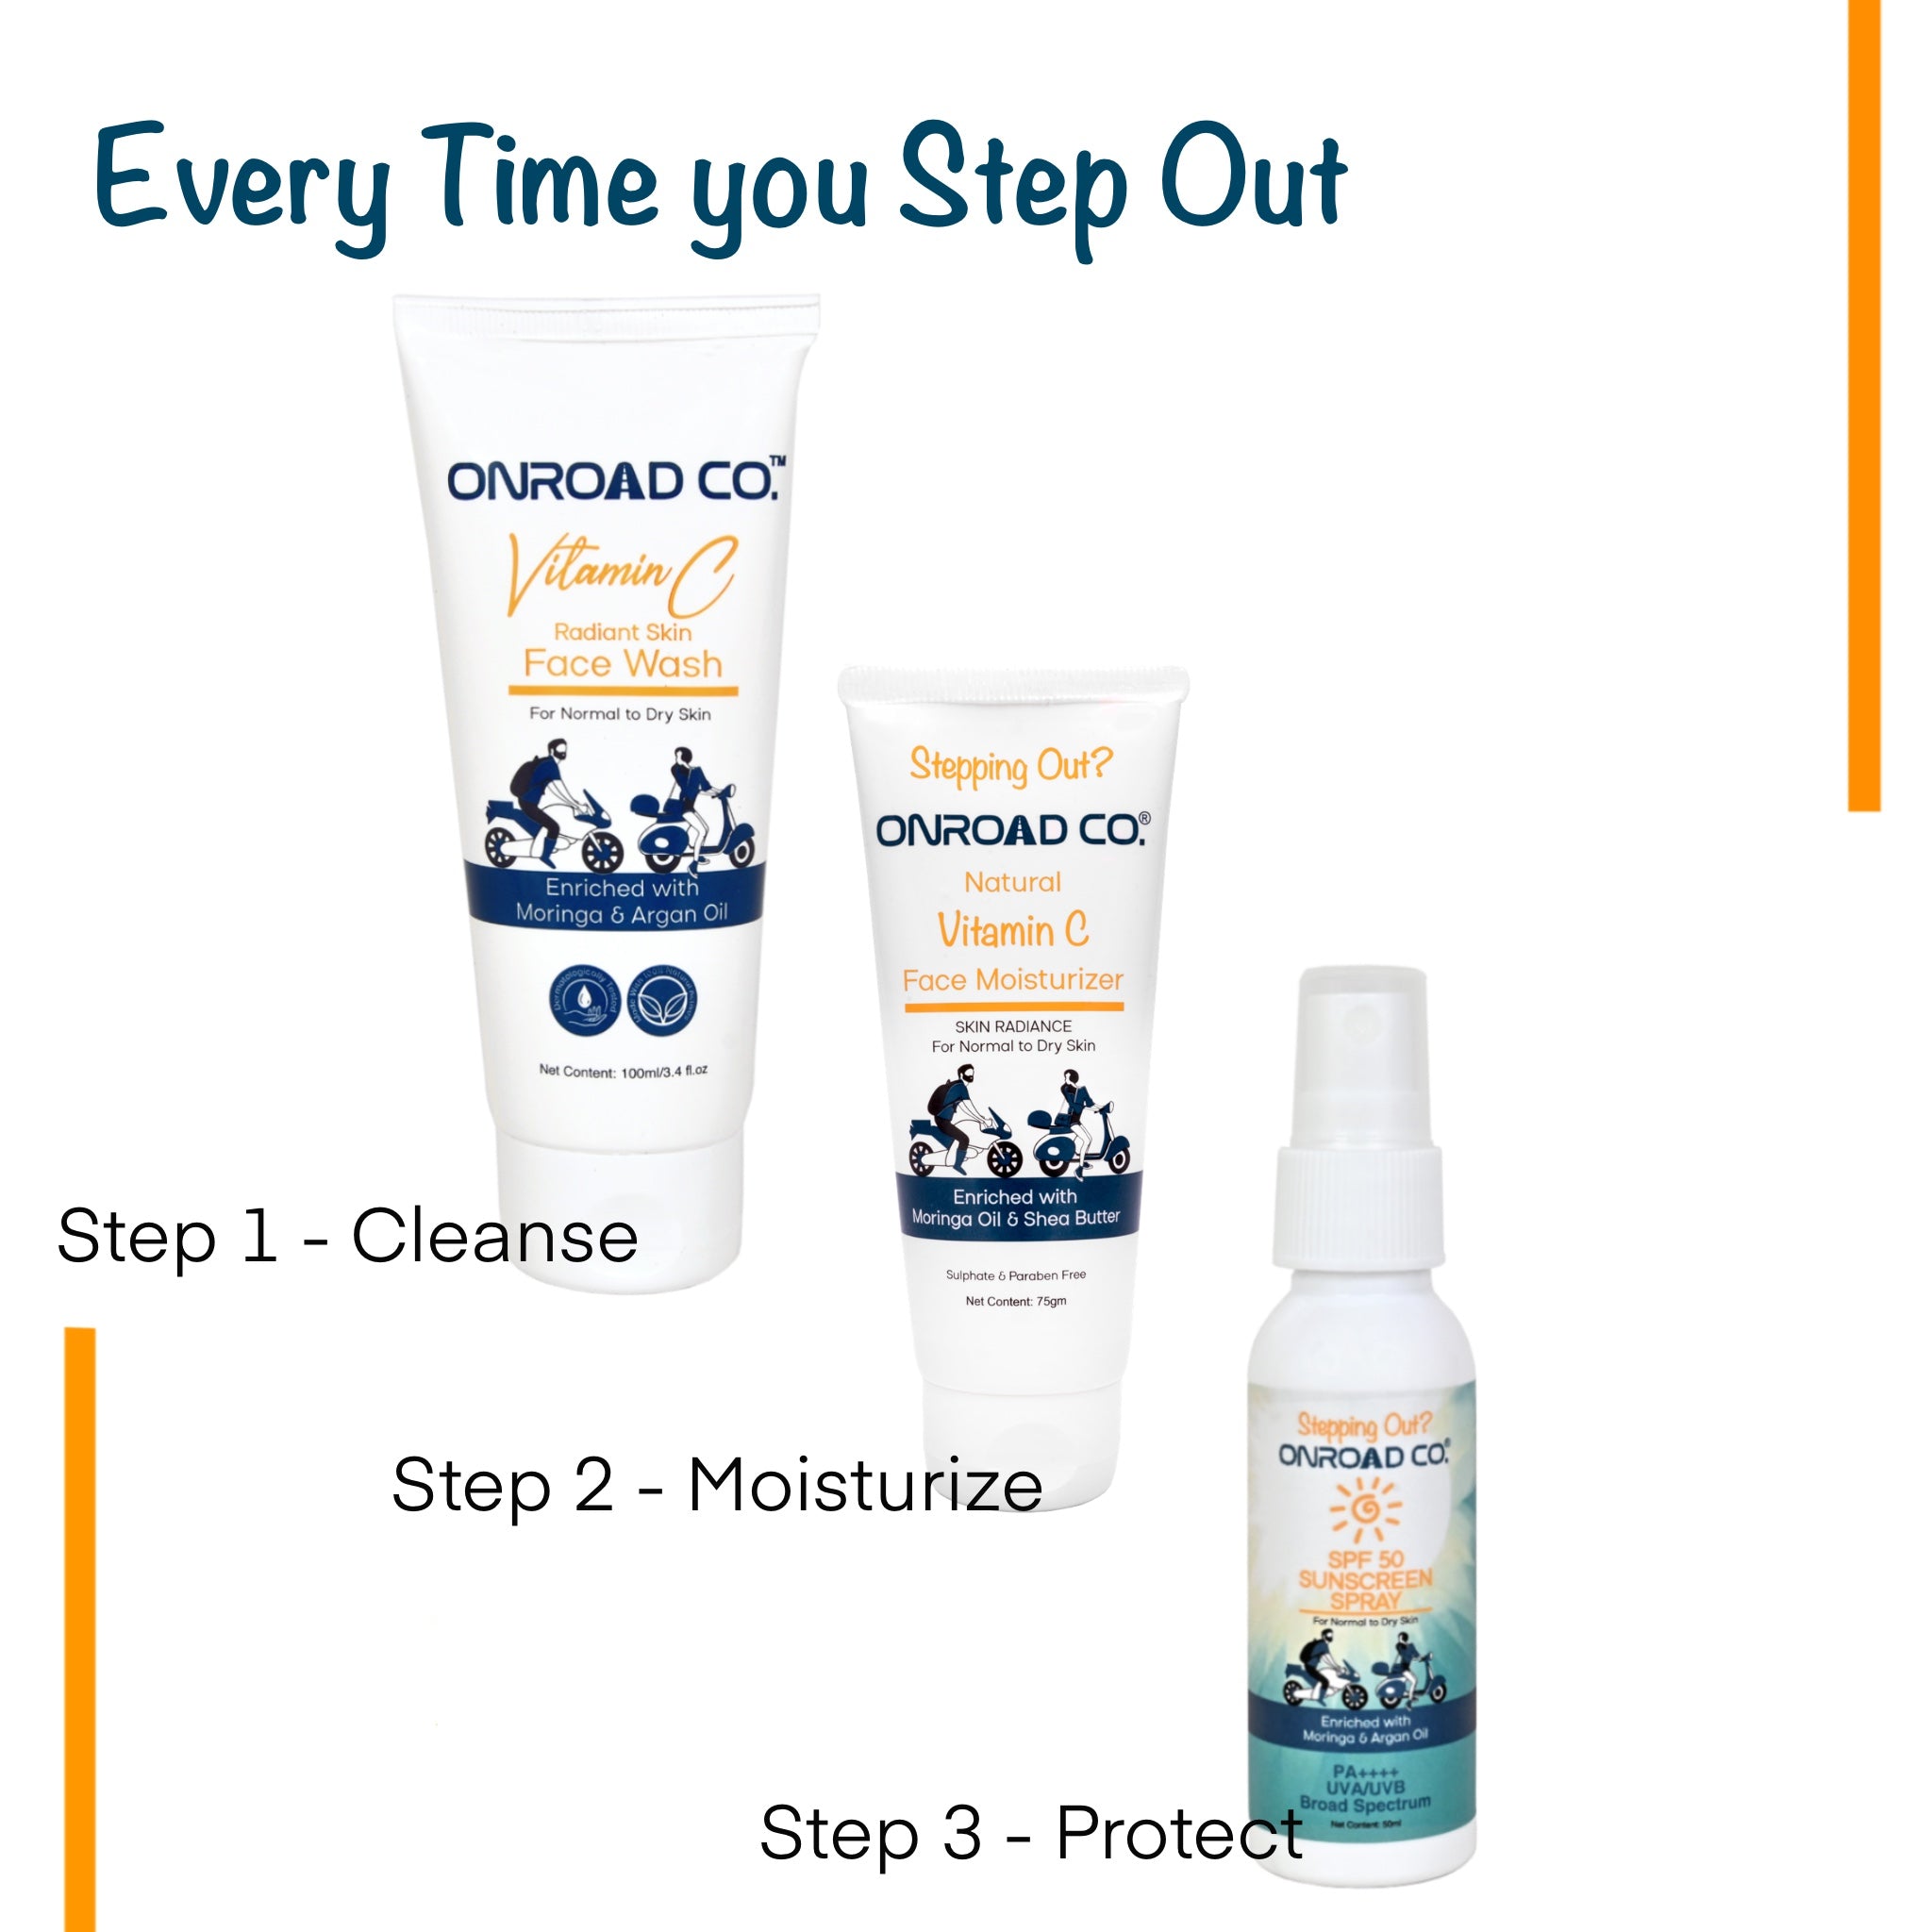 Onroad Co. SPF 50 Sunscreen Spray | Made for Normal to Dry Skin | No White Cast | No Benzophenone | 100% Toxin Free